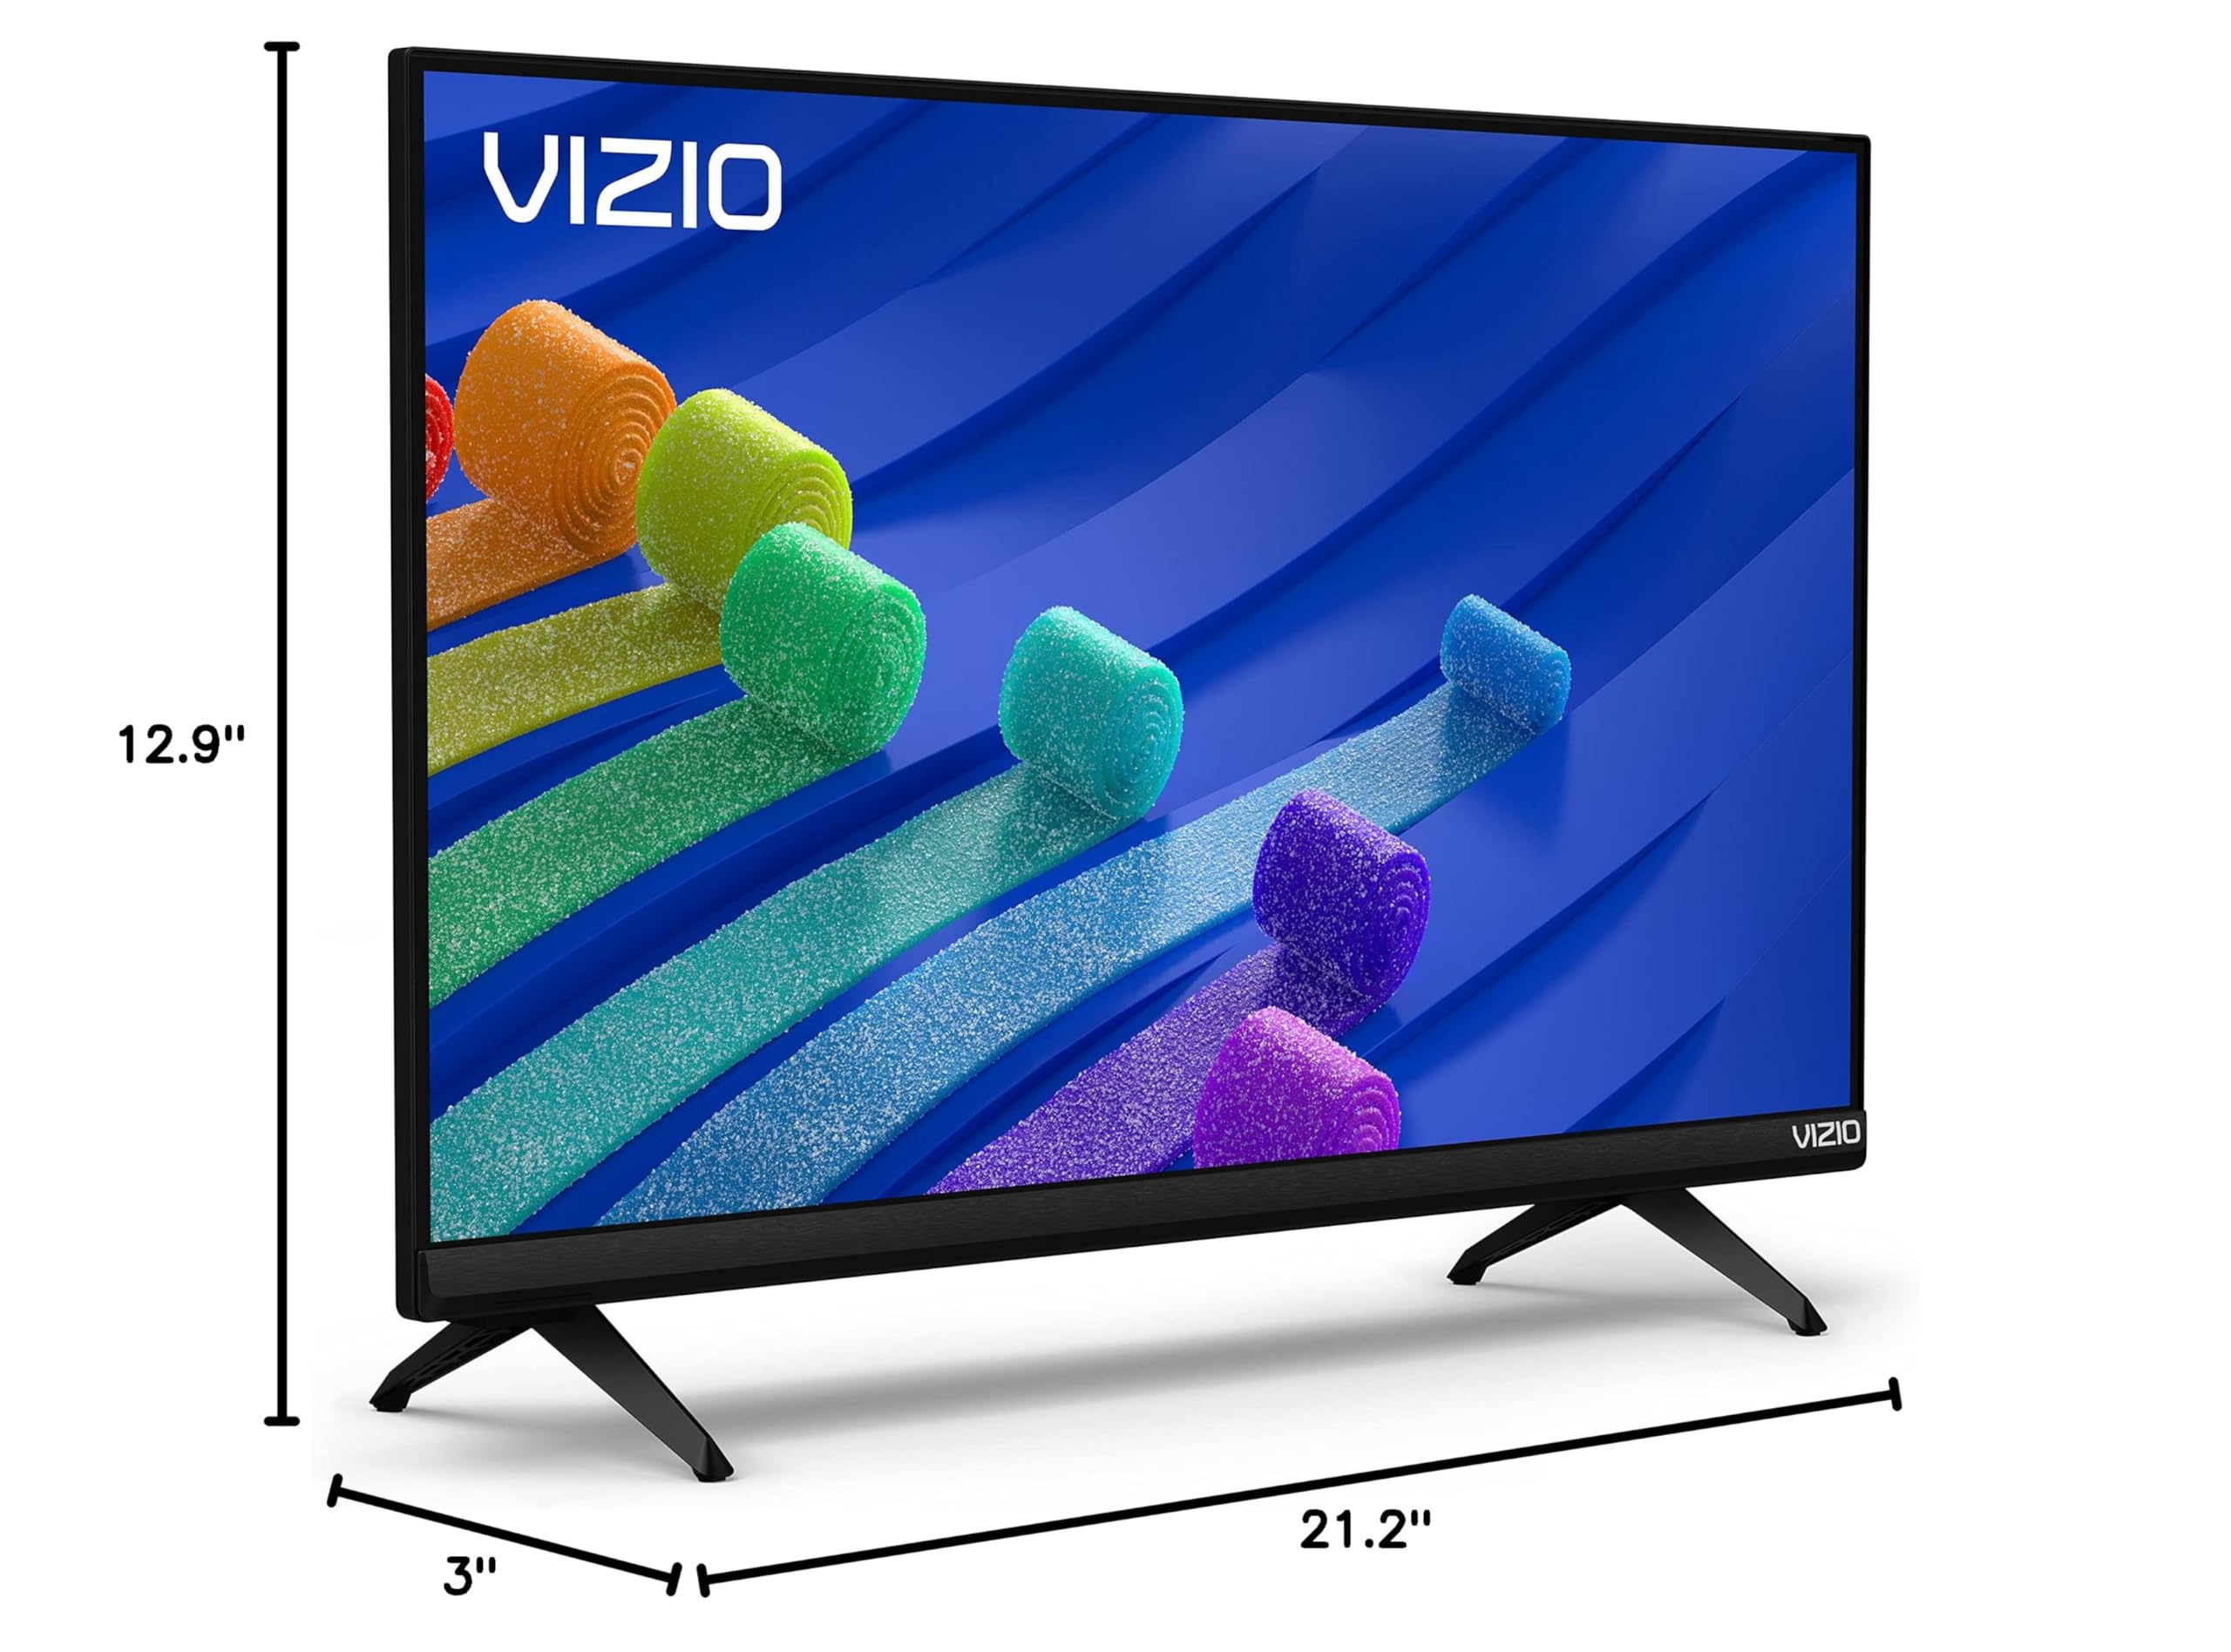 VIZIO 24-inch D-Series Full HD 1080p Smart TV with Apple AirPlay and Chromecast Built-in, Alexa Compatibility, D24f4-J01, 2021 Model